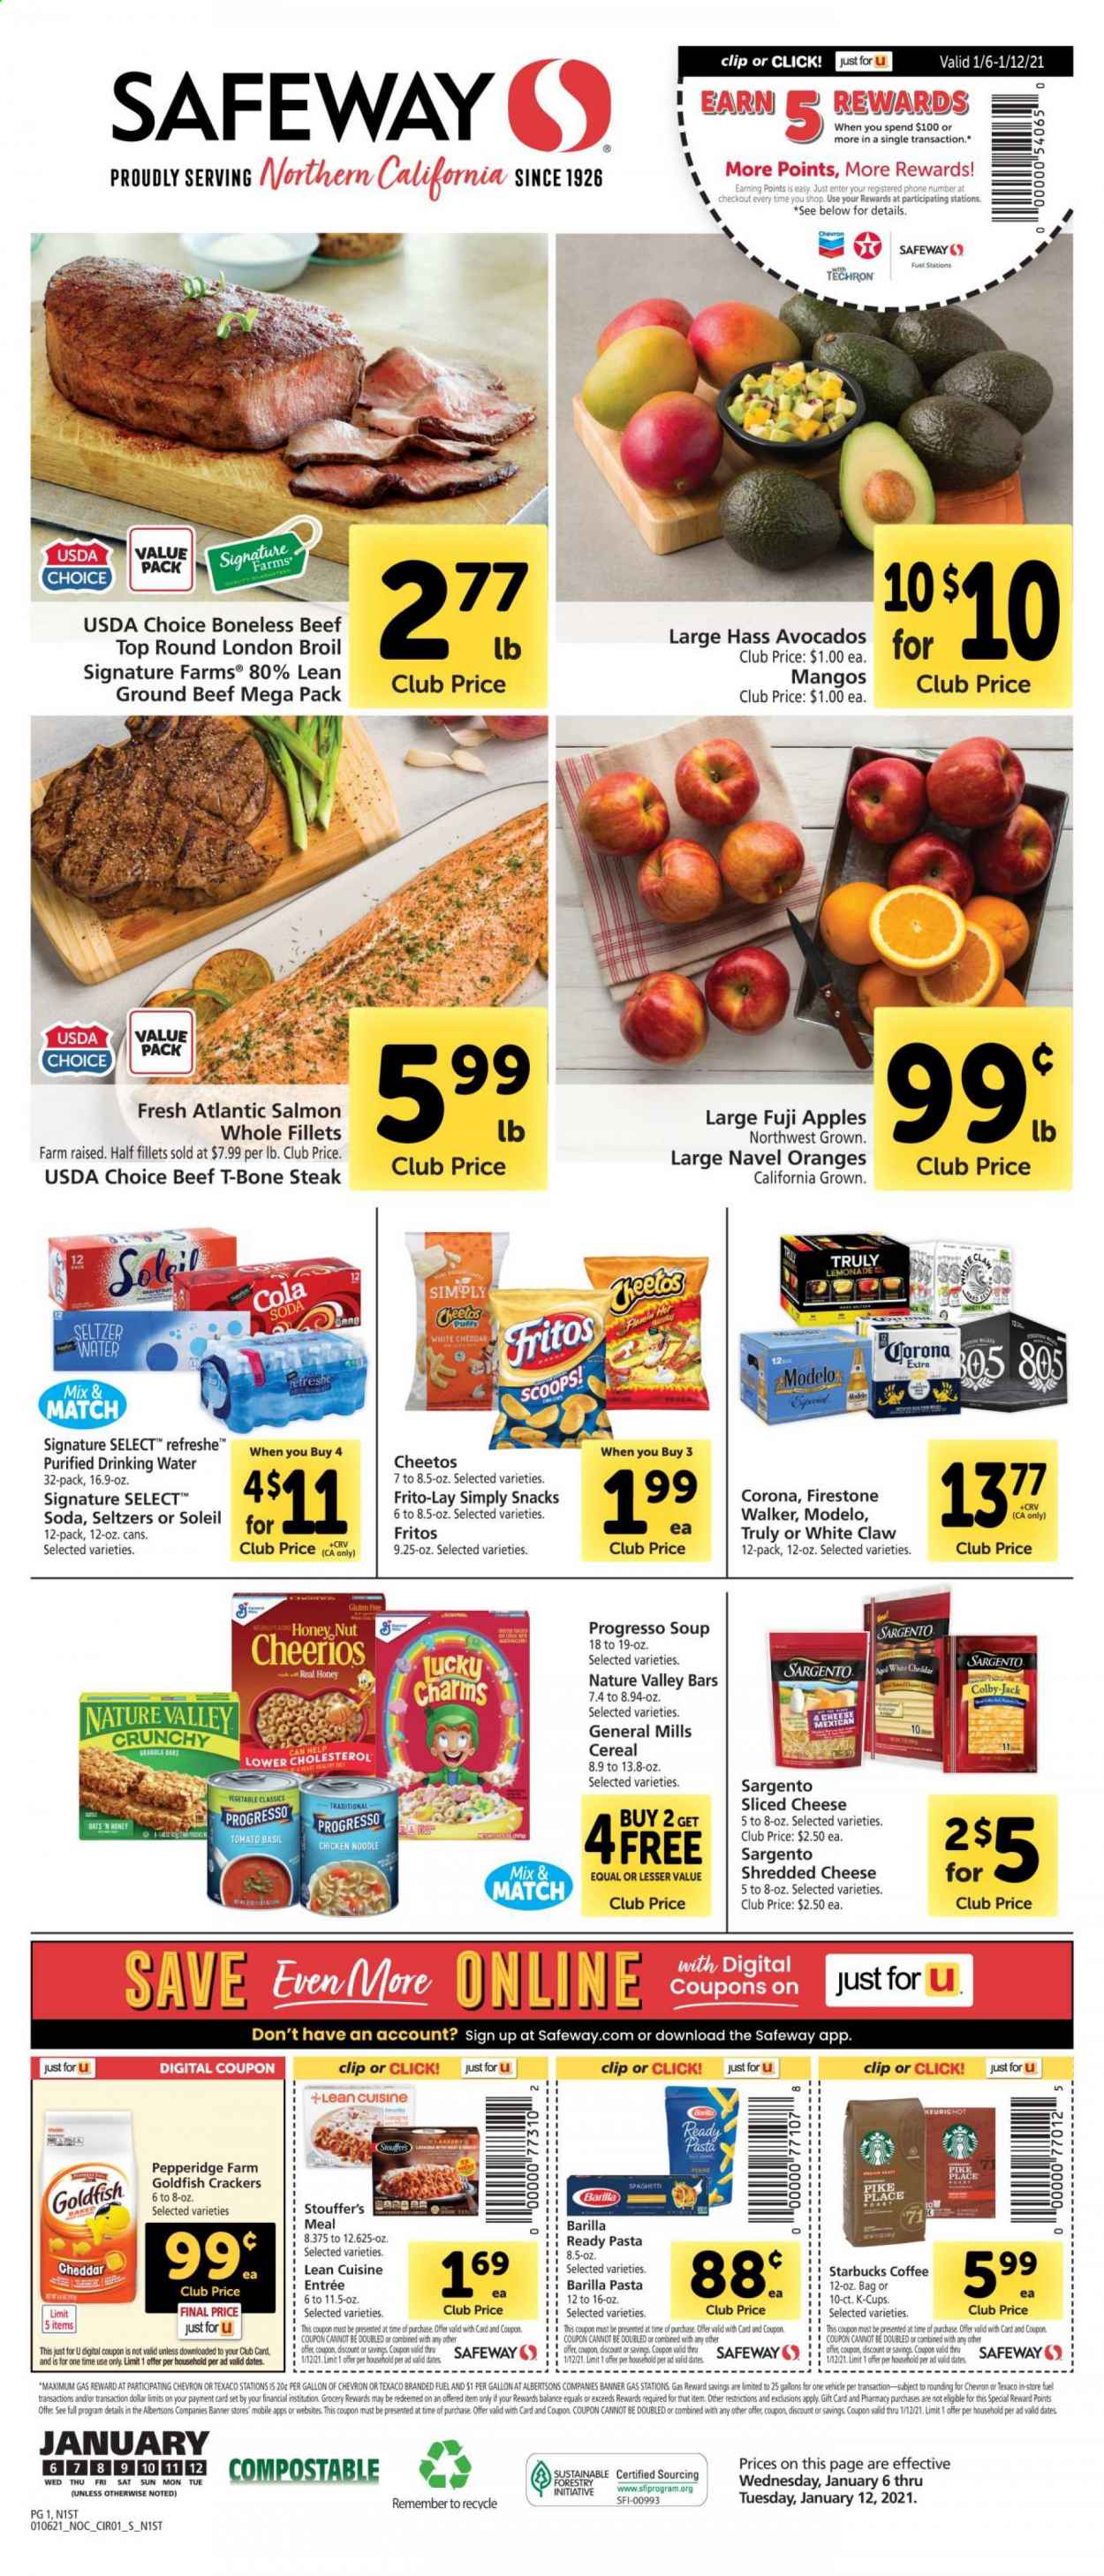 thumbnail - Safeway Flyer - 01/06/2021 - 01/12/2021 - Sales products - Fuji apple, apples, oranges, beef meat, ground beef, t-bone steak, steak, salmon, Barilla, Progresso, Lean Cuisine, Colby cheese, shredded cheese, sliced cheese, cheddar, Sargento, mango, Stouffer's, crackers, Cheetos, snack, Goldfish, Frito-Lay, cereals, Fritos, Cheerios, Nature Valley, spaghetti, pasta, noodles, penne, esponja, dried dates, lemonade, soda, seltzer water, coffee, Starbucks, coffee capsules, K-Cups, White Claw, TRULY, beer, Corona Extra, Modelo, Firestone Walker, avocado. Page 1.